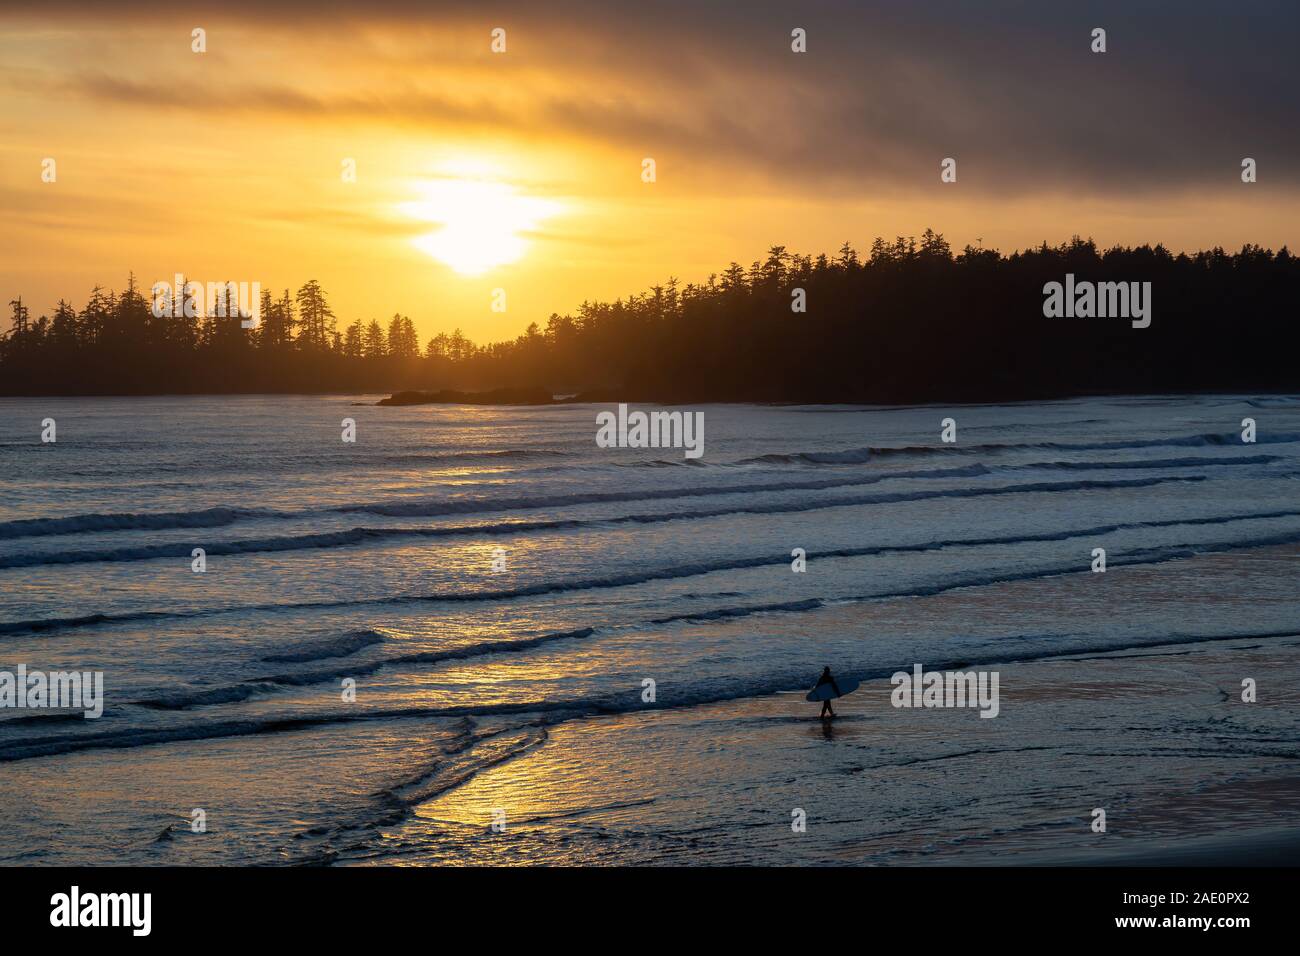 Long Beach, Near Tofino and Ucluelet in Vancouver Island, BC, Canada.  Silhouette Surfer with a Surf Board walking in water with golden sunset on the Stock Photo